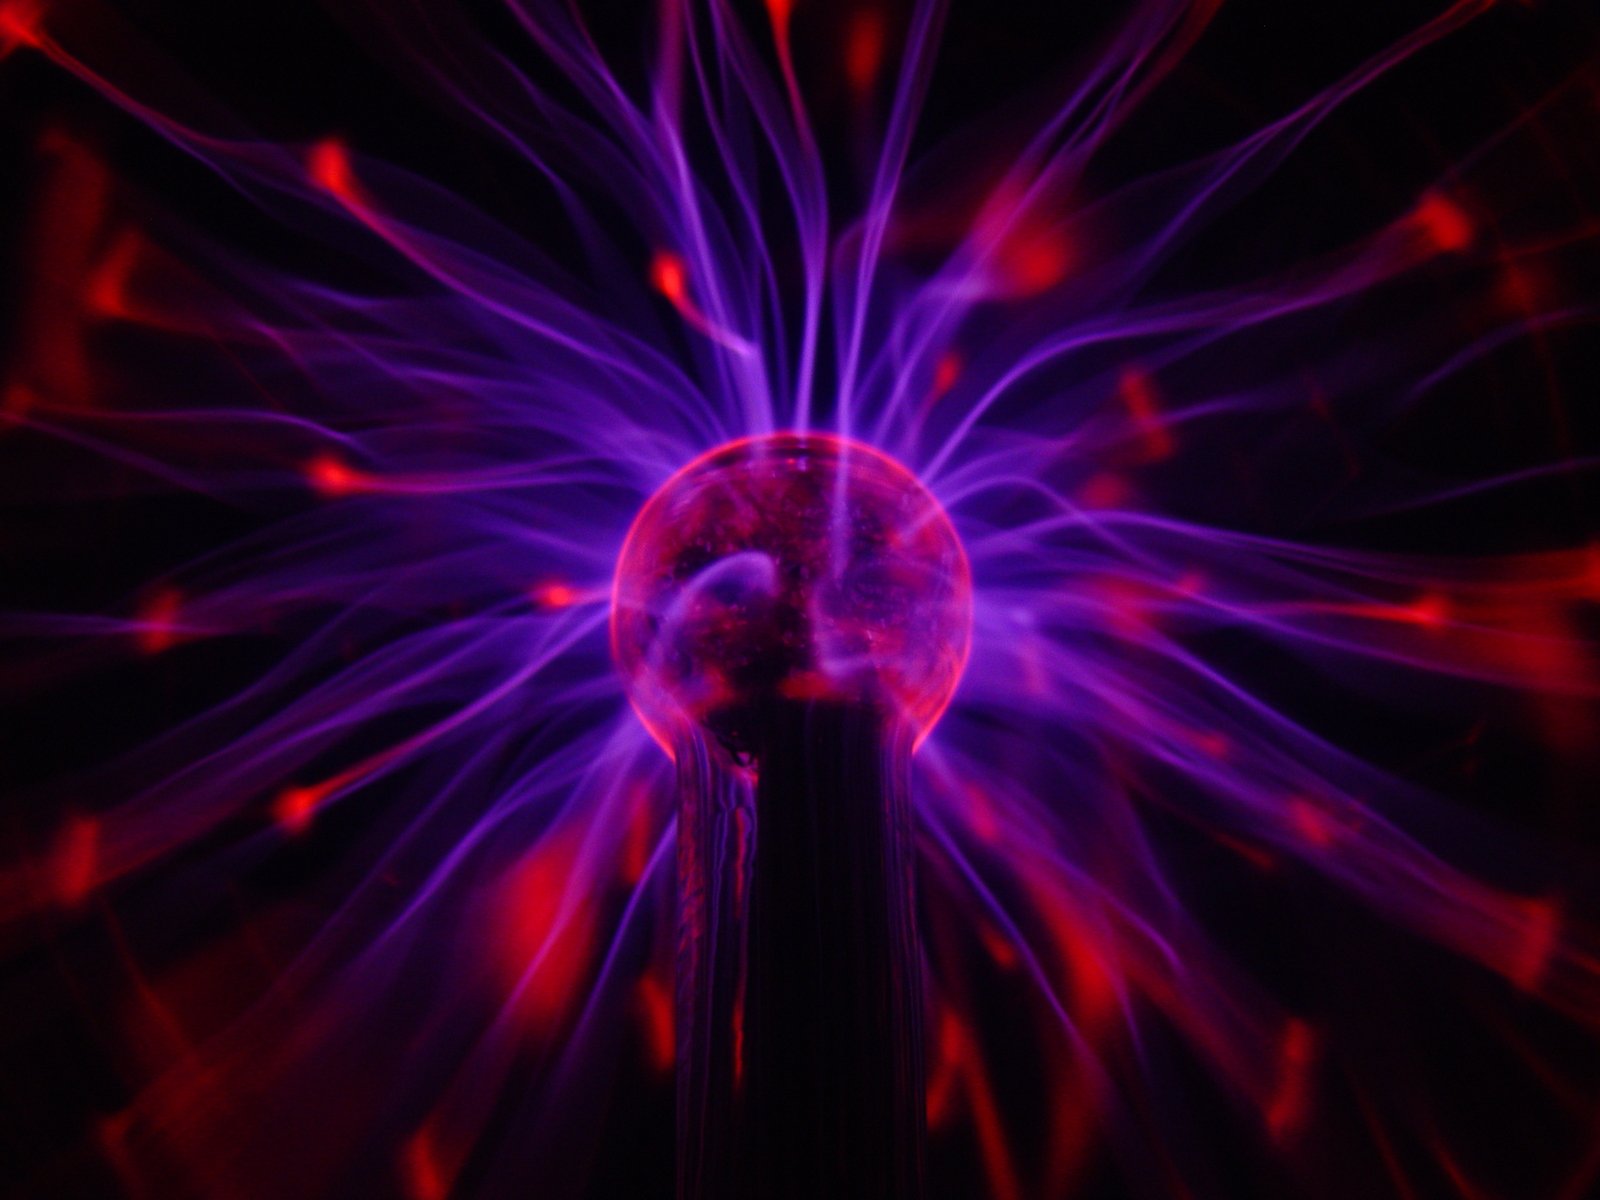 purple and red fractal shapes glowing in the dark